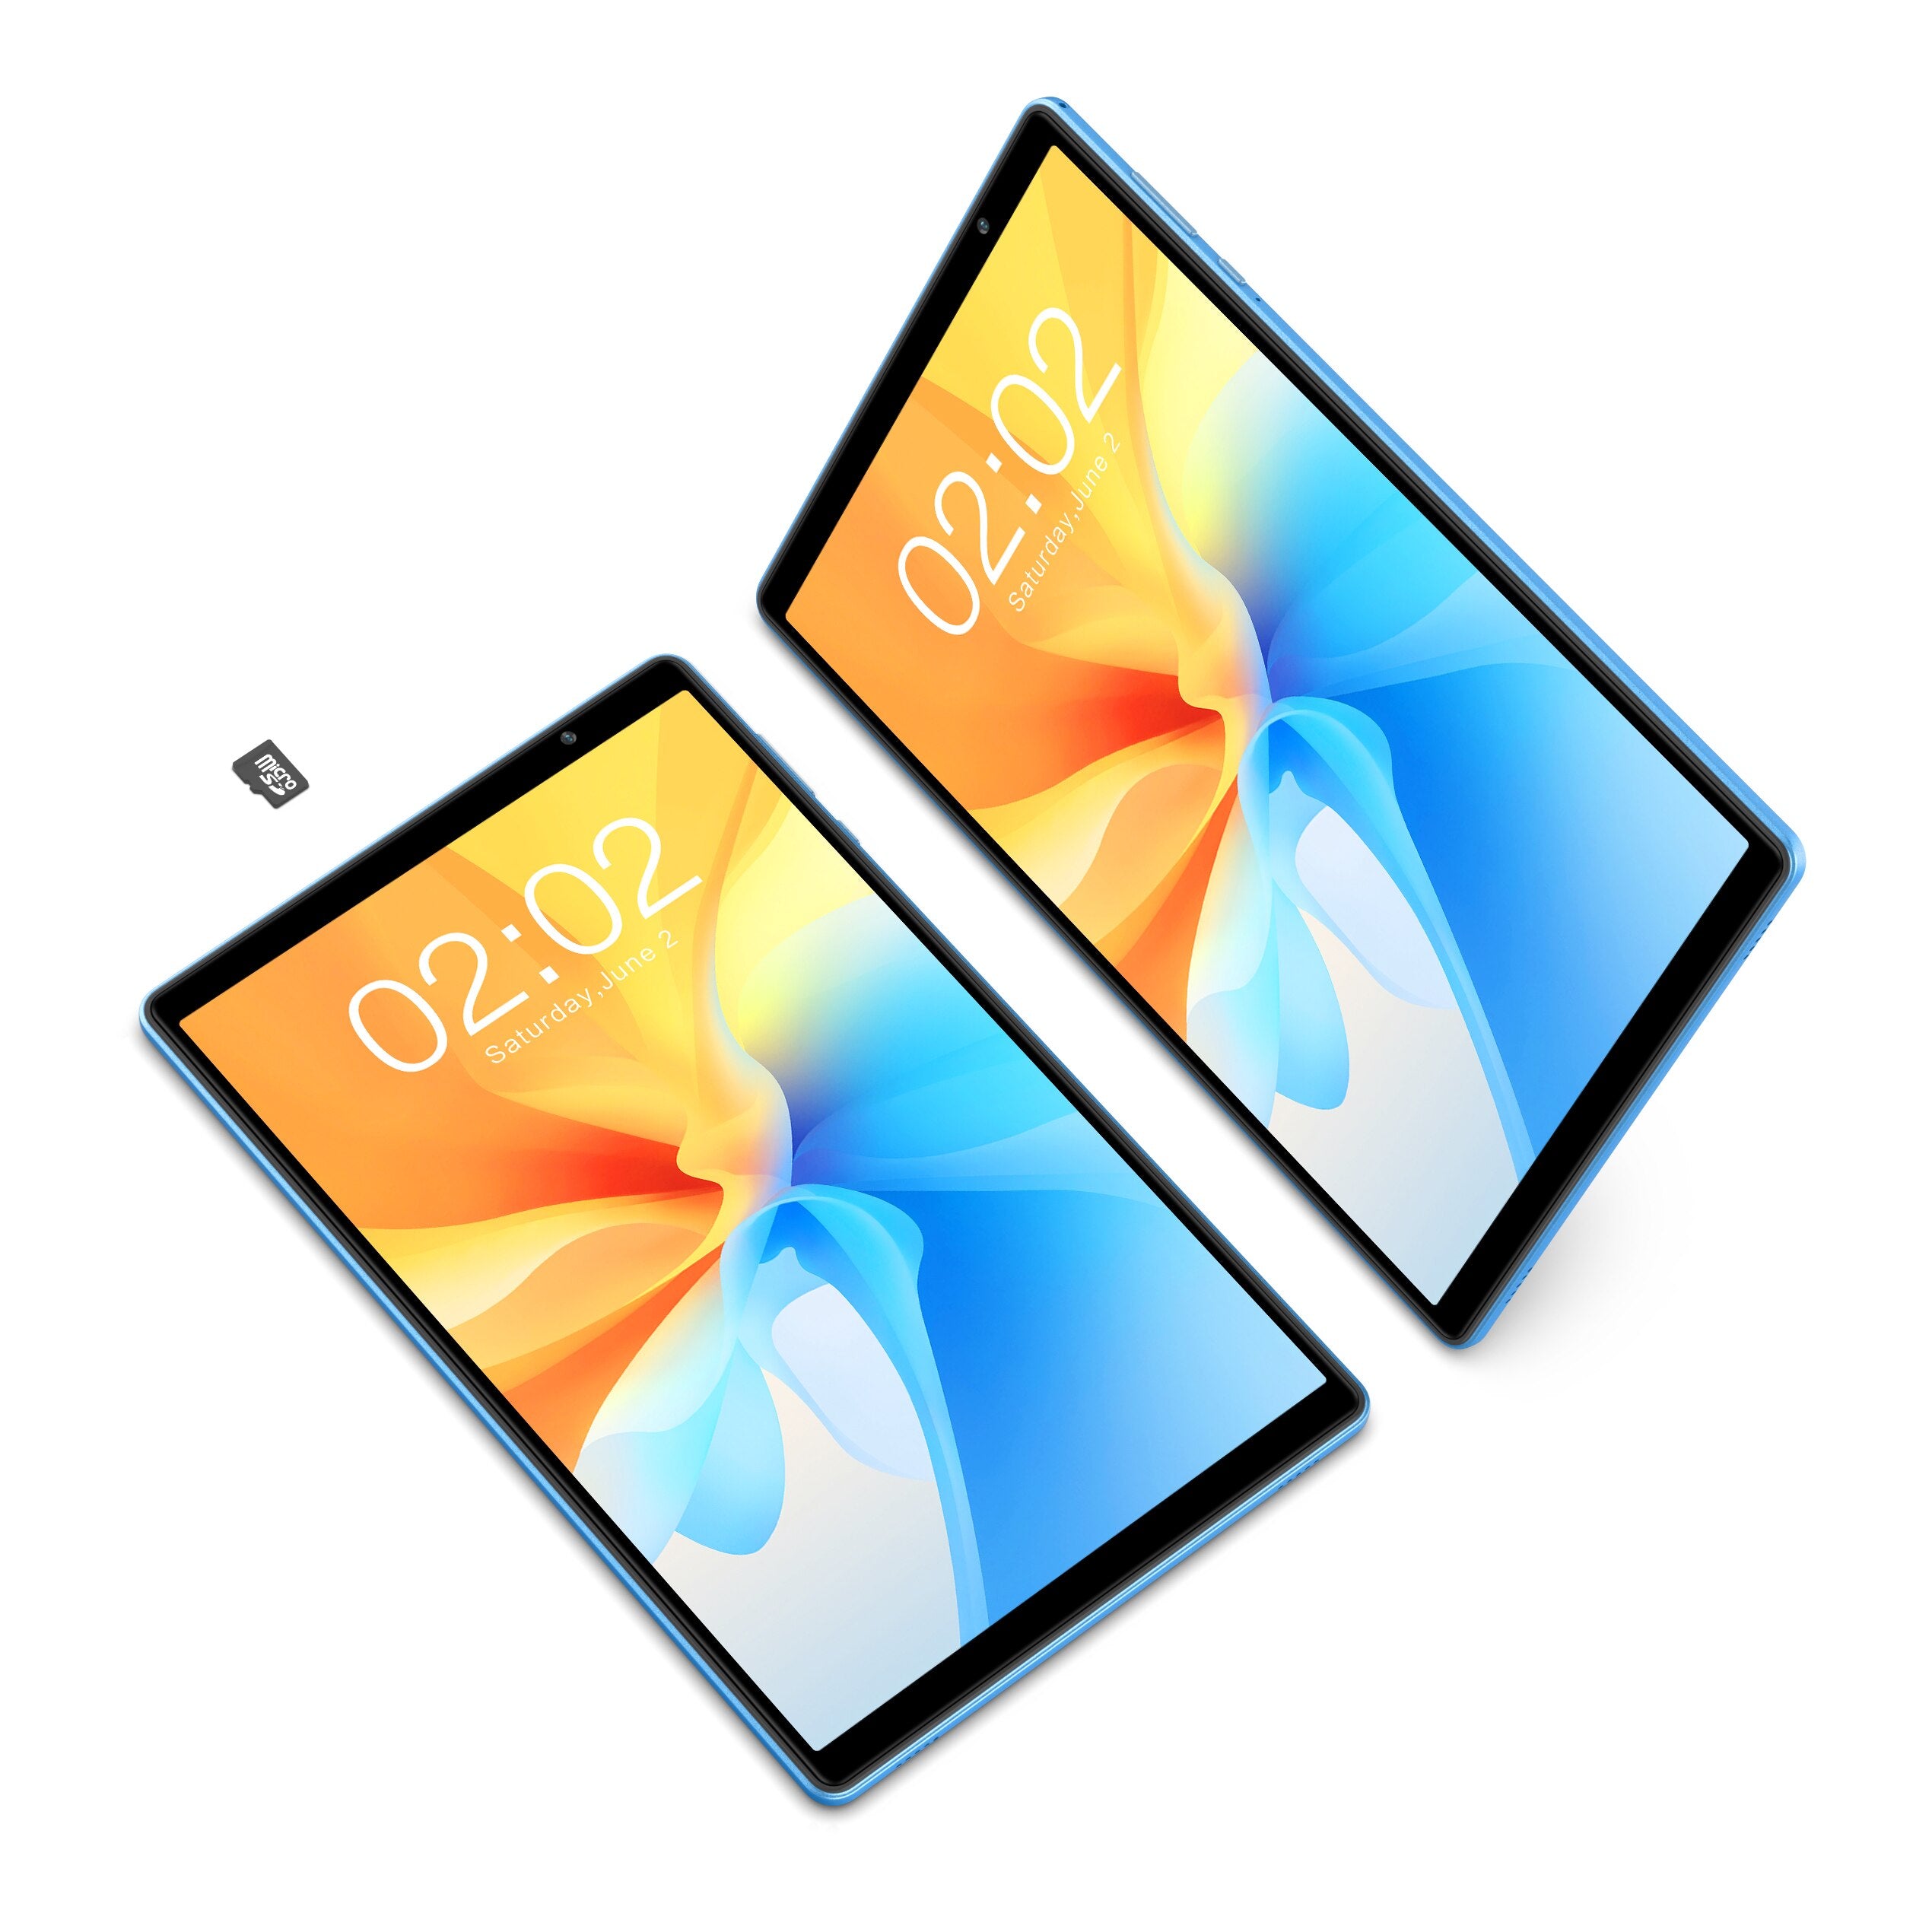 Teclast P25T Allwinner A133 Quad Core 4GB RAM 64GB ROM 10.1 Inch Android 12 Tablet Limited Time Complimentary Shell